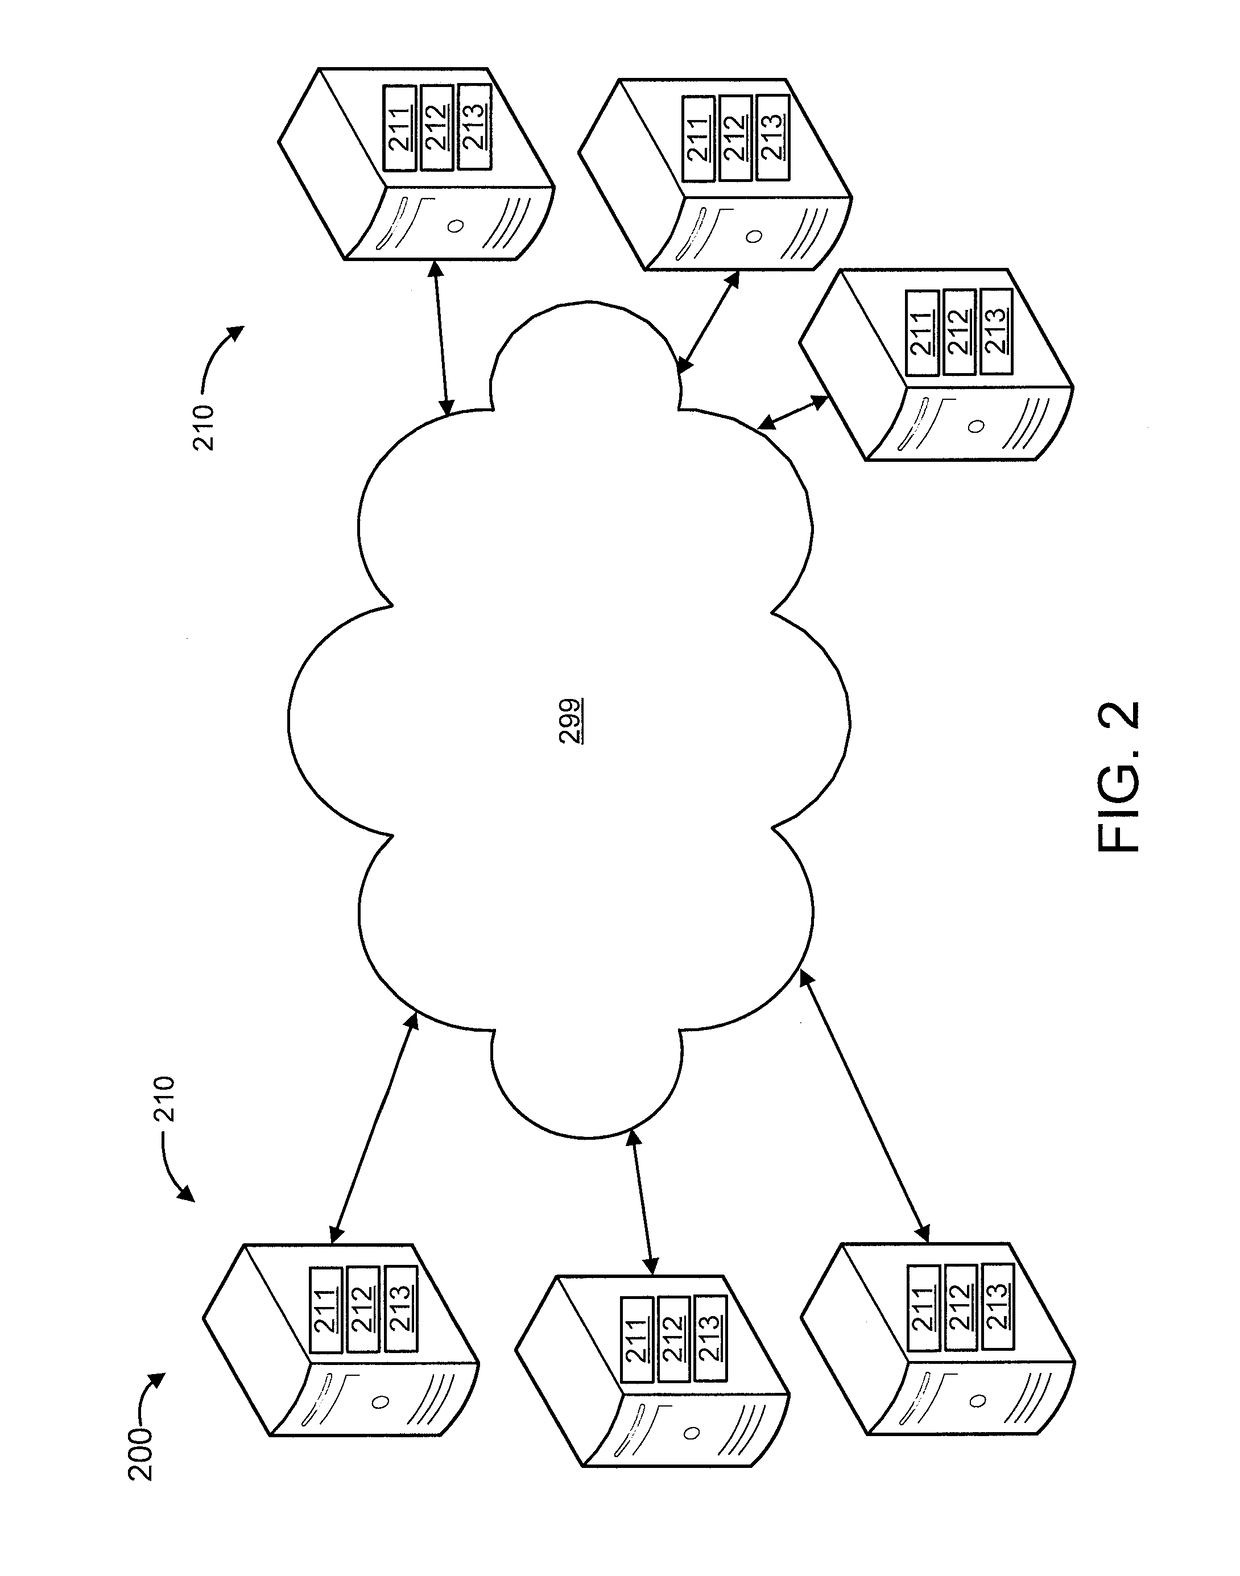 Mechanism for fault diagnosis and recovery of network service chains